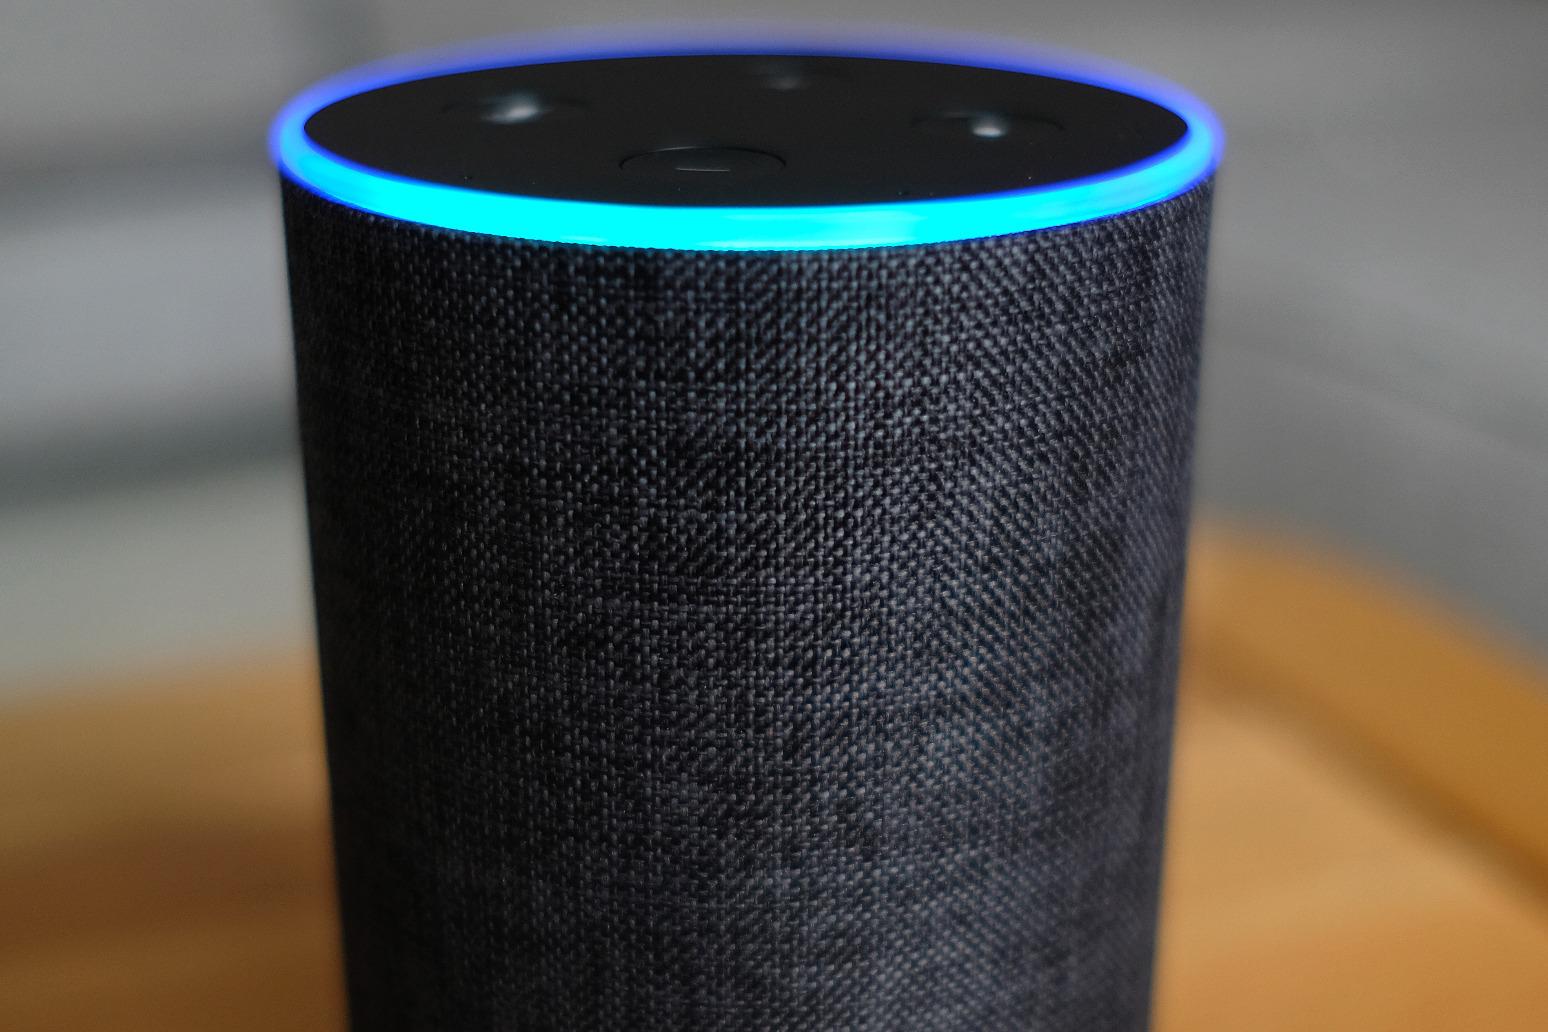 Alexa getting more proactive to free up peoples time